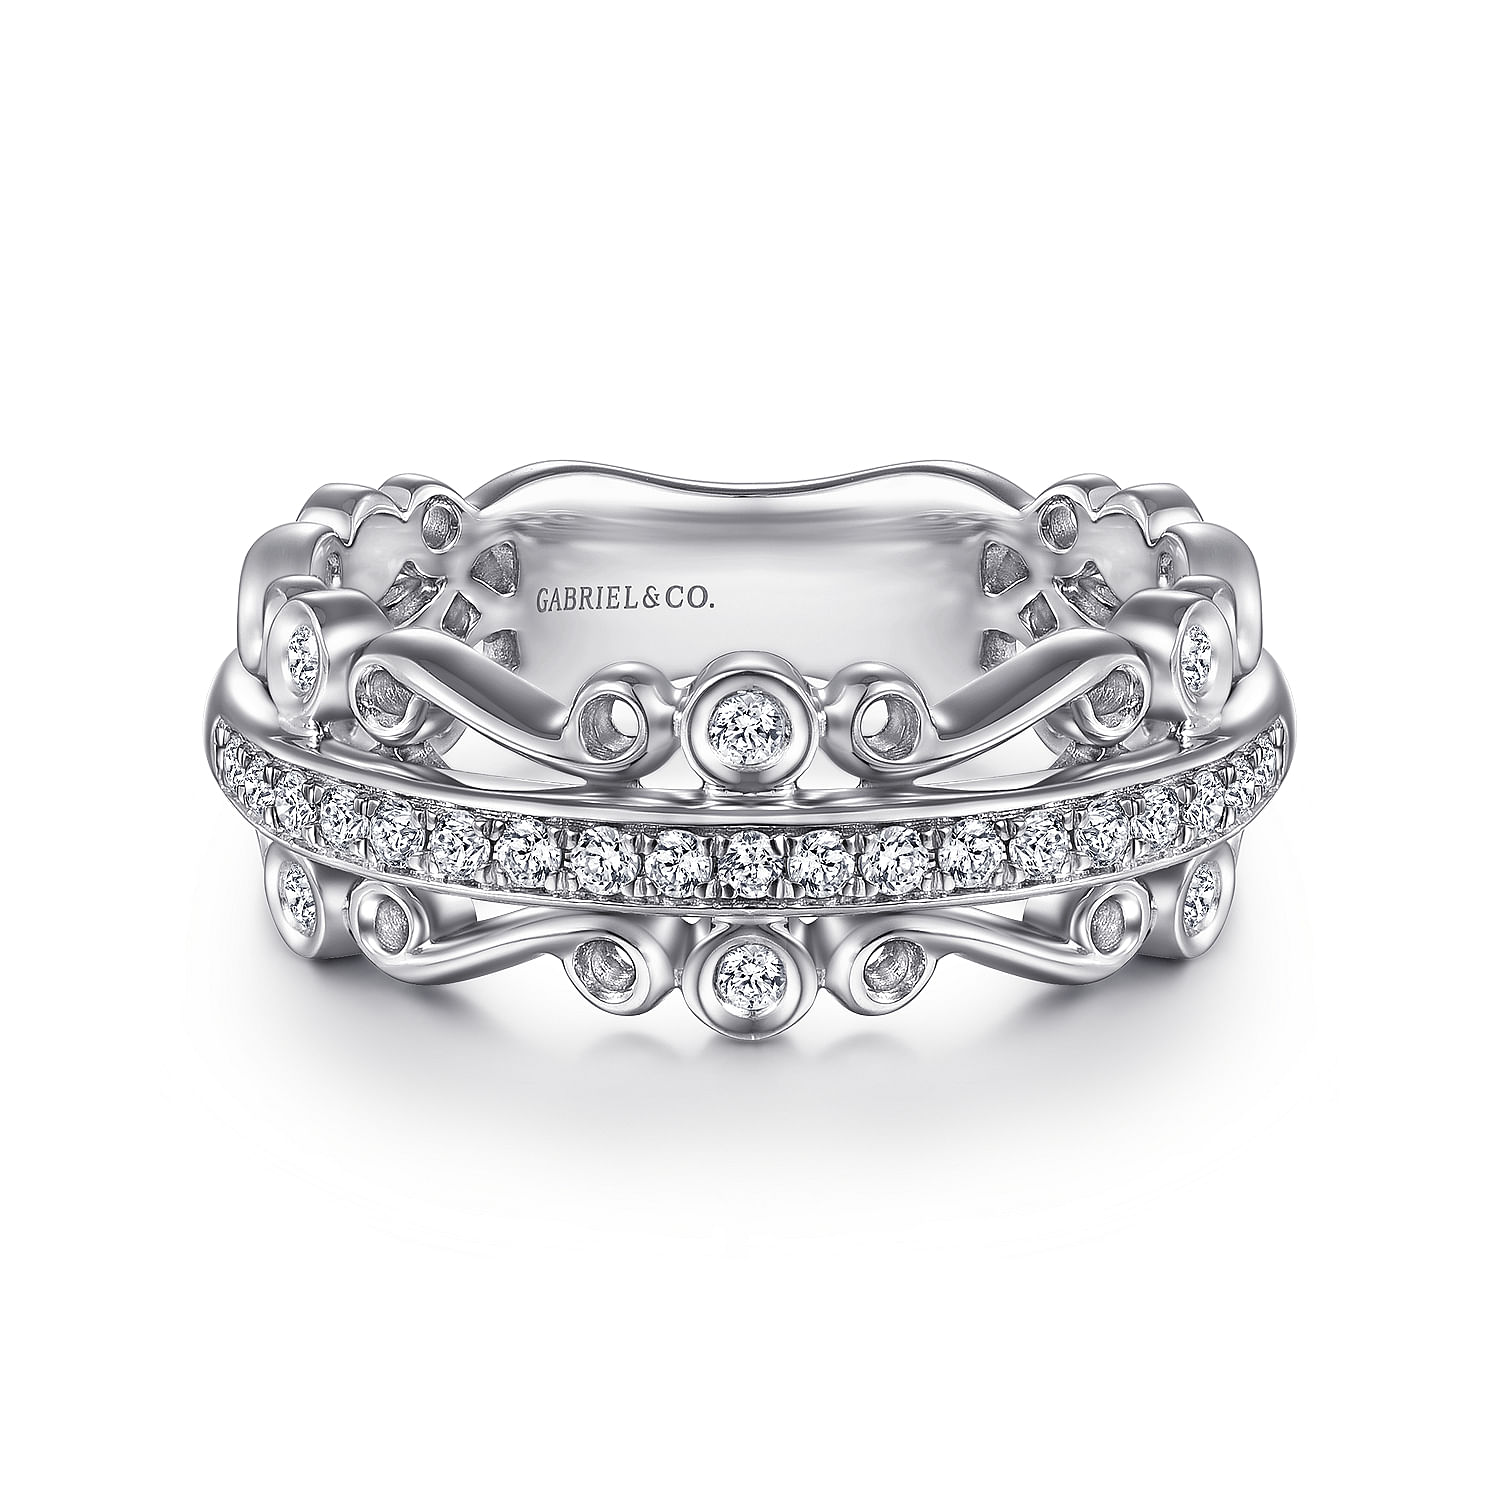 Wide 14K White Gold Diamond Anniversary Band with Scrollwork